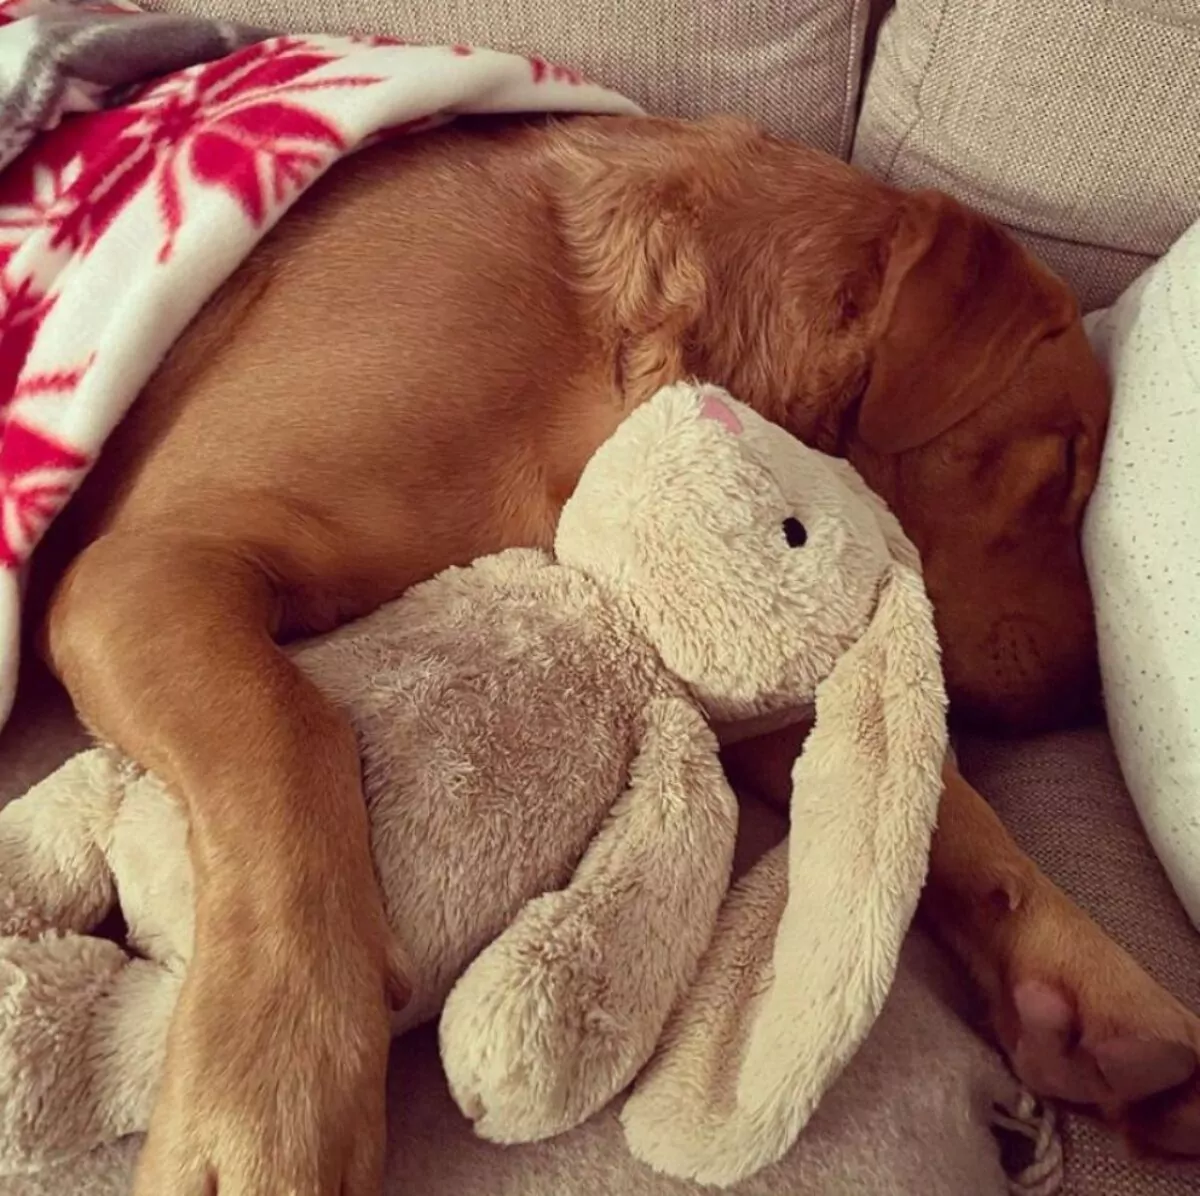 Labrador asleep in their bed with a blanket and a teddy bear